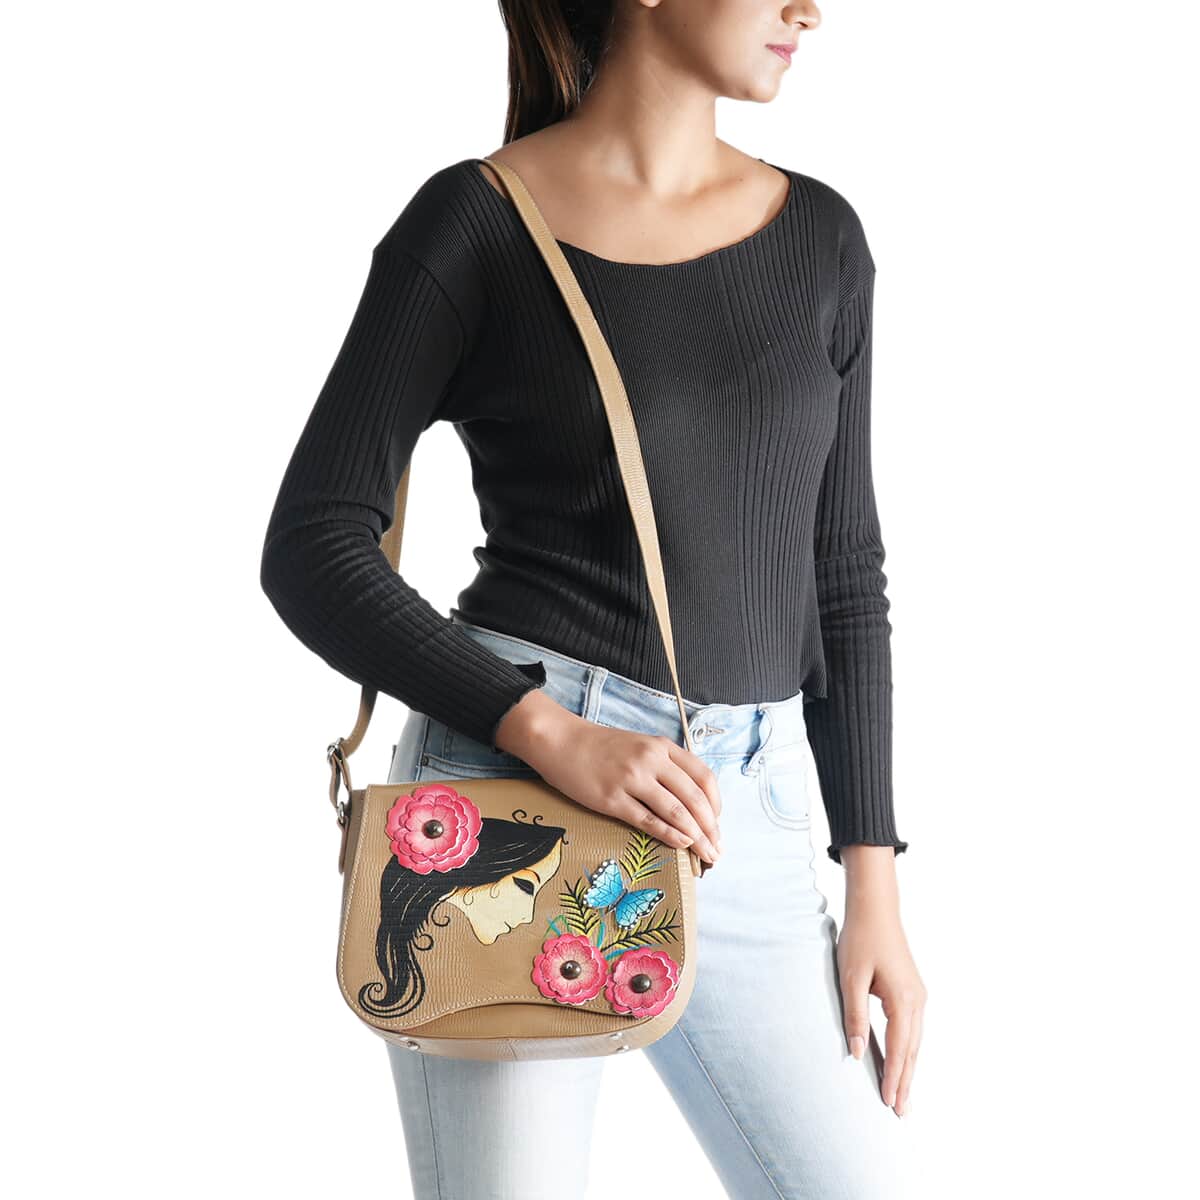 "SUKRITI 100% Genuine Leather Applique Crossbody Bag Theme: Floral Girl  Color: Dark Beige Size: 10 x 3 x 8.5 inches" image number 1